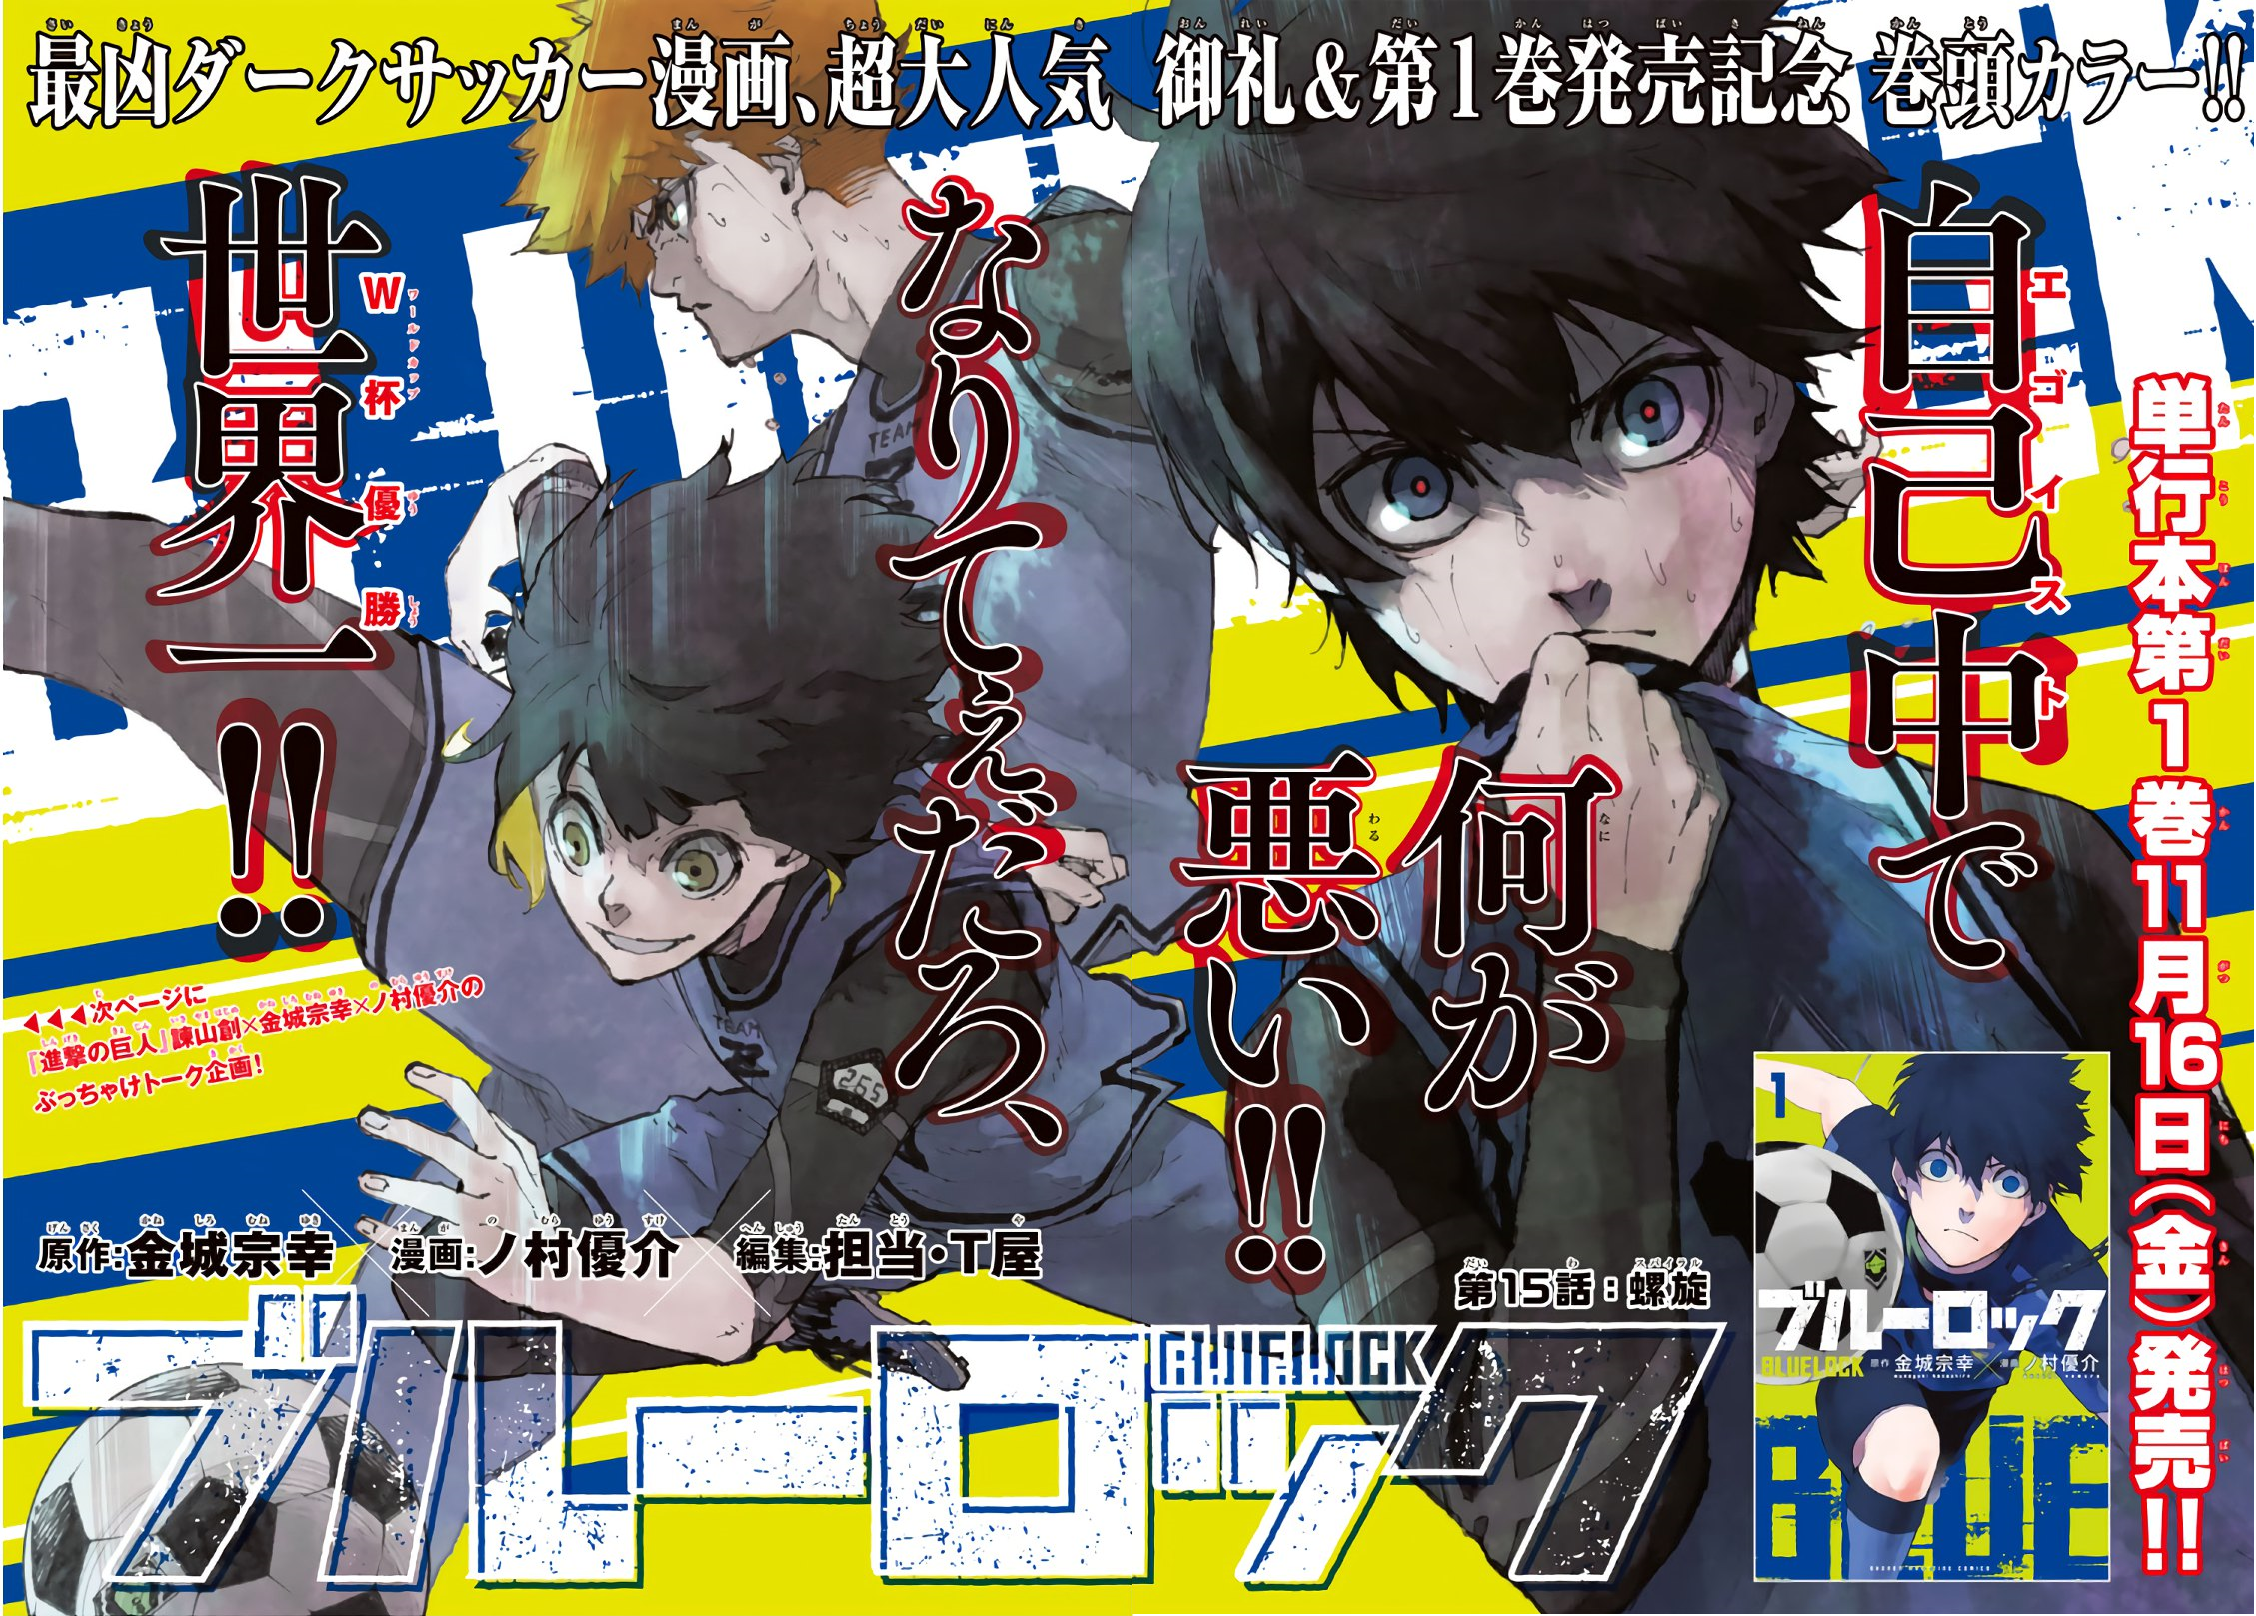 Blue Lock Chapter 237 Spoiler, Release Date, Raw Scan, Count Down